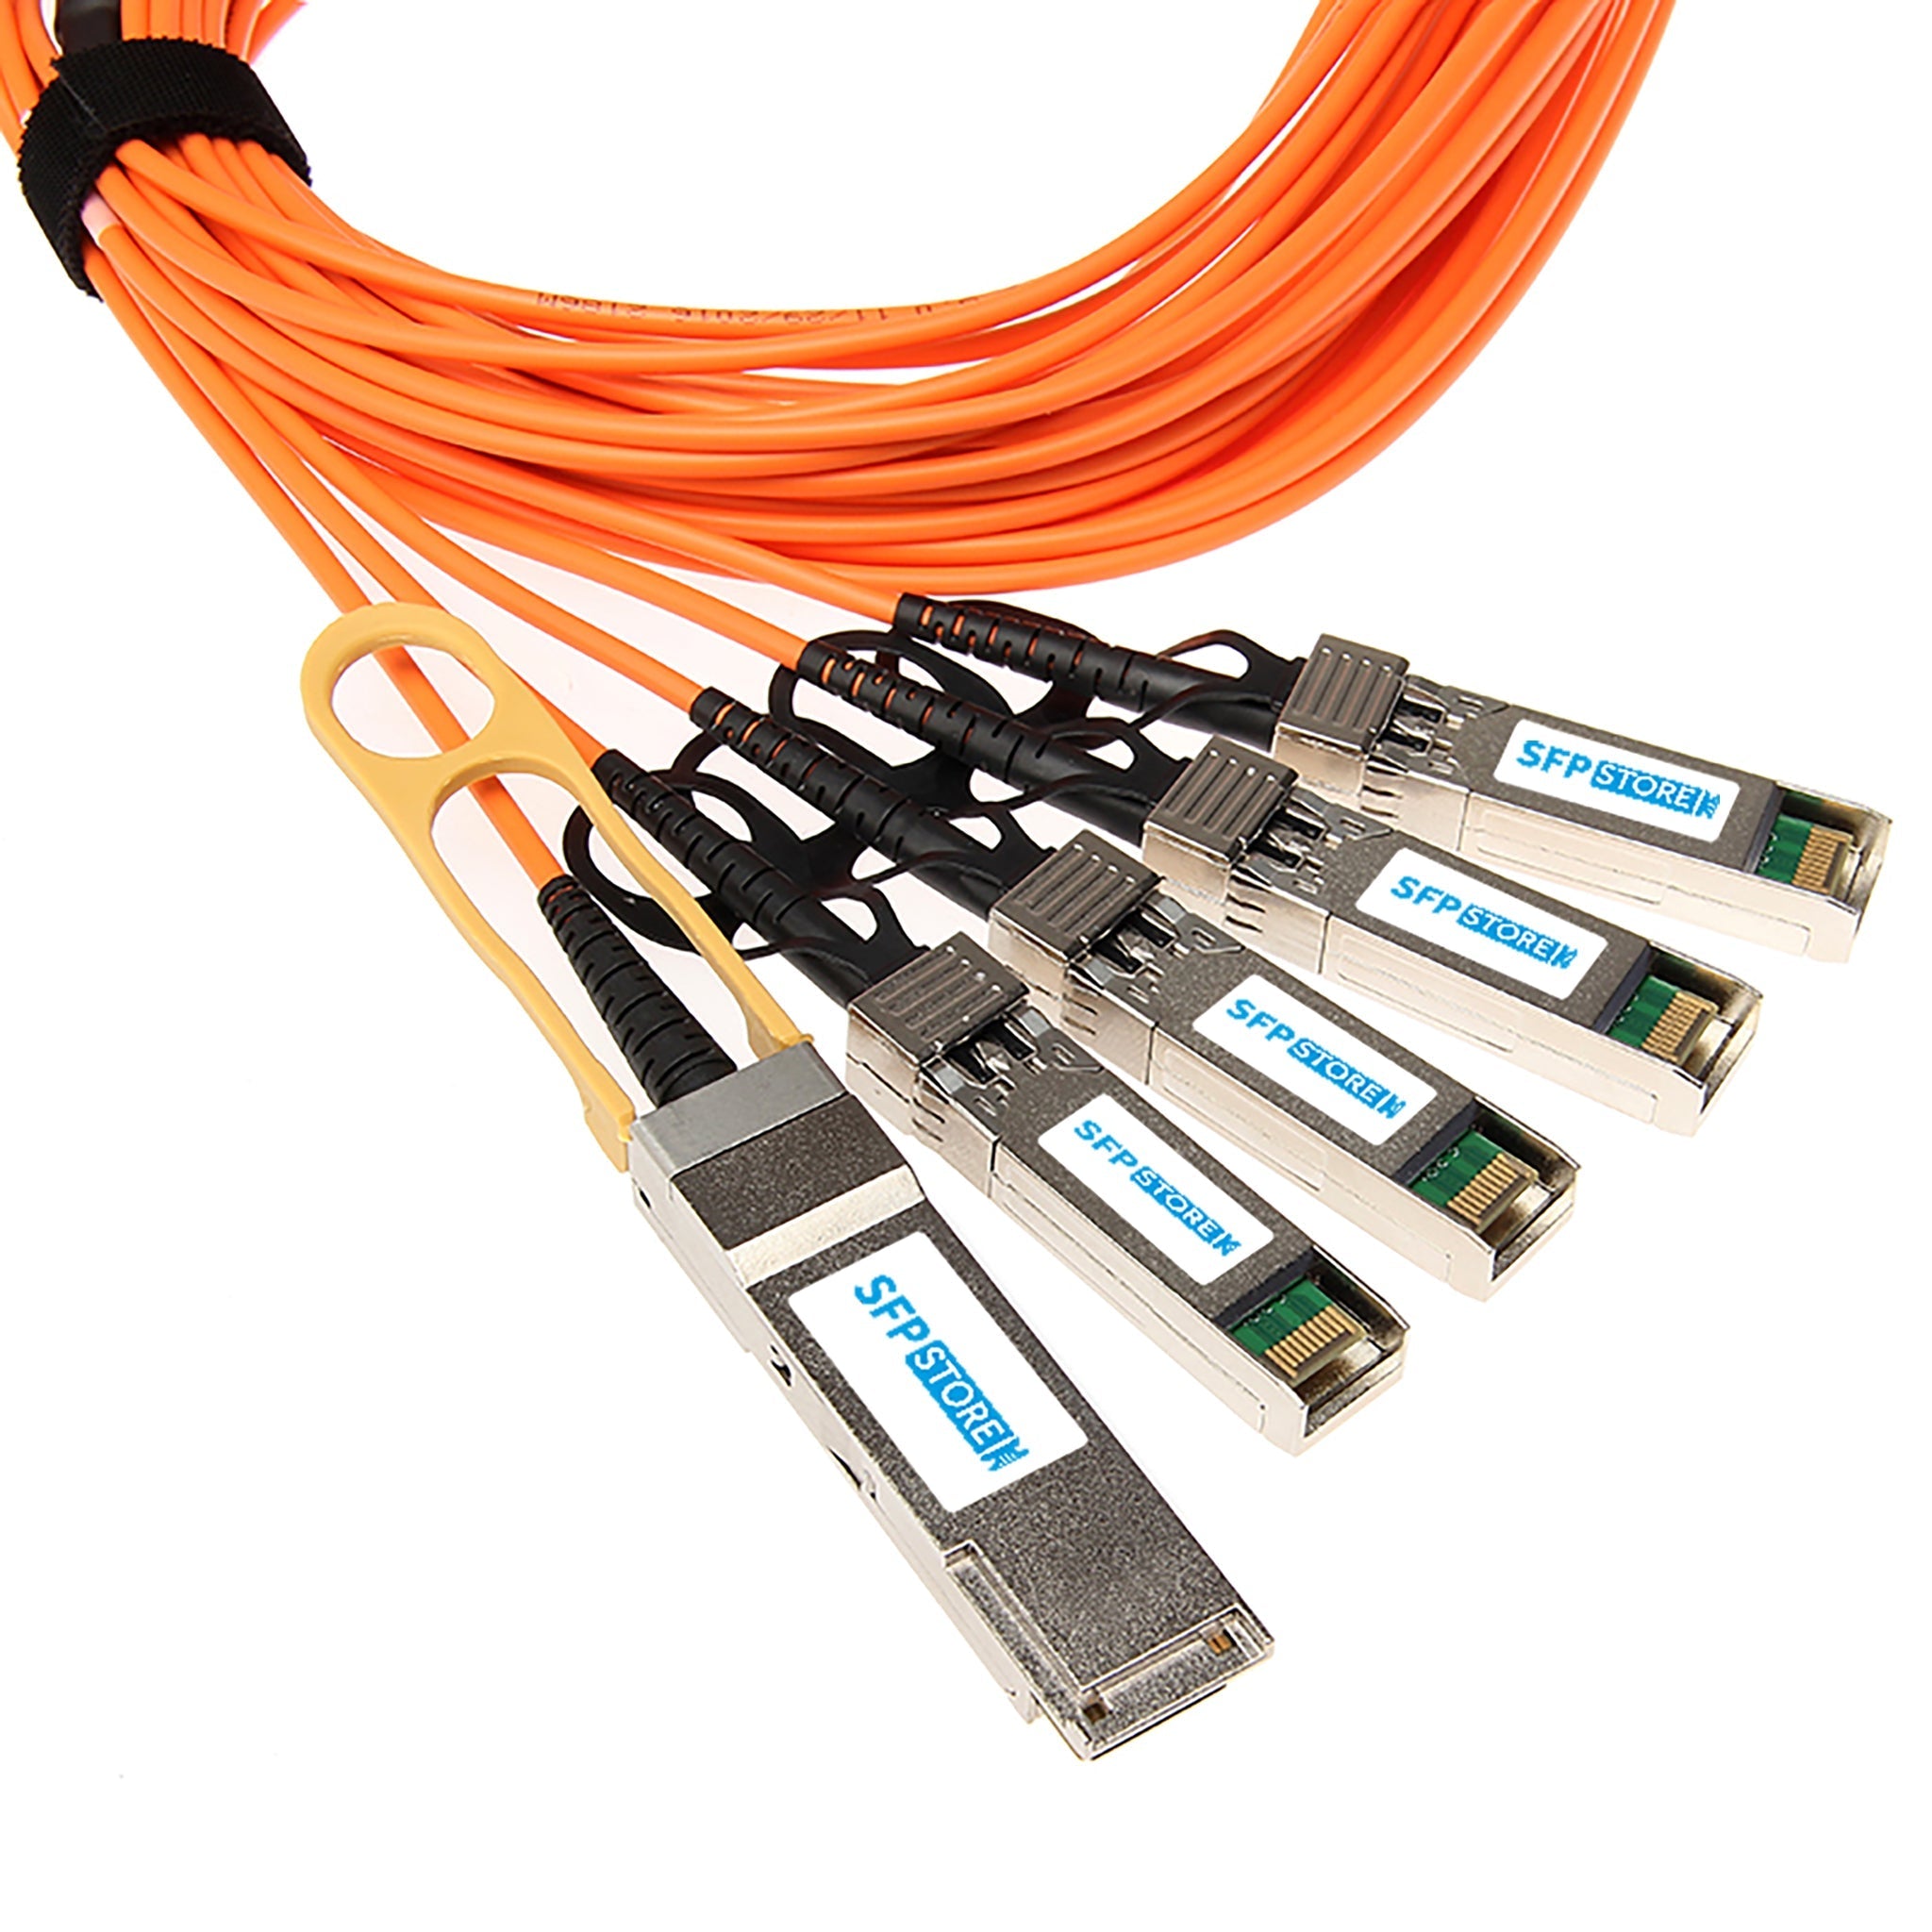 AOC-QSFP-4SFP-10G-2M-C - 2m Dell Compatible 40G QSFP+ to 4 x 10G SFP+ Active Optical Cable